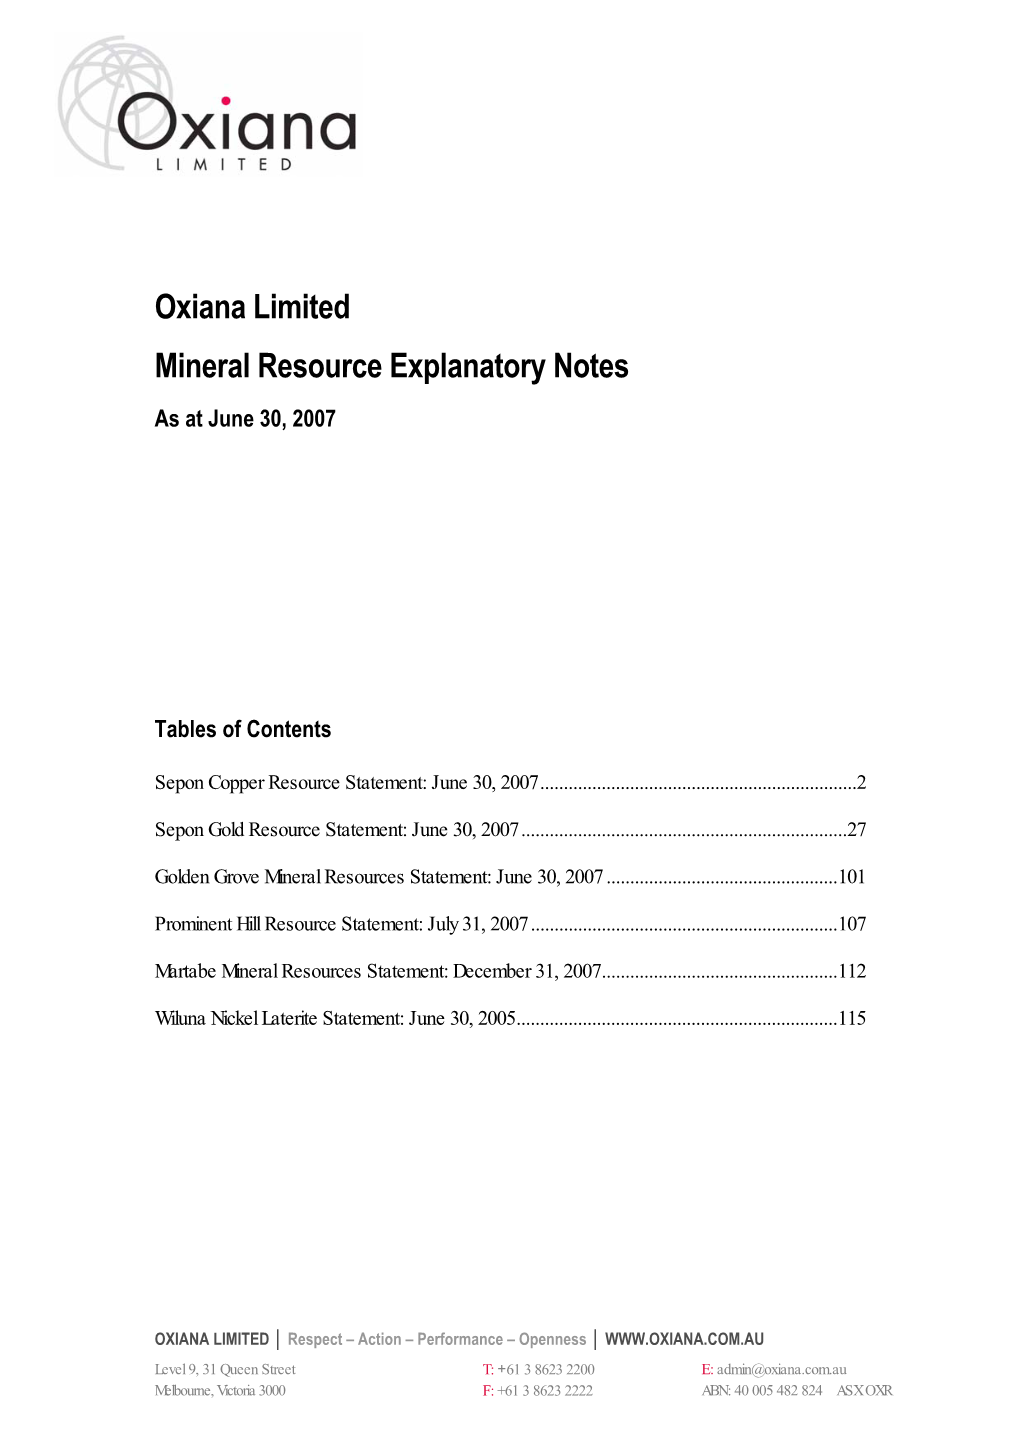 Oxiana Limited Mineral Resource Explanatory Notes As at June 30, 2007